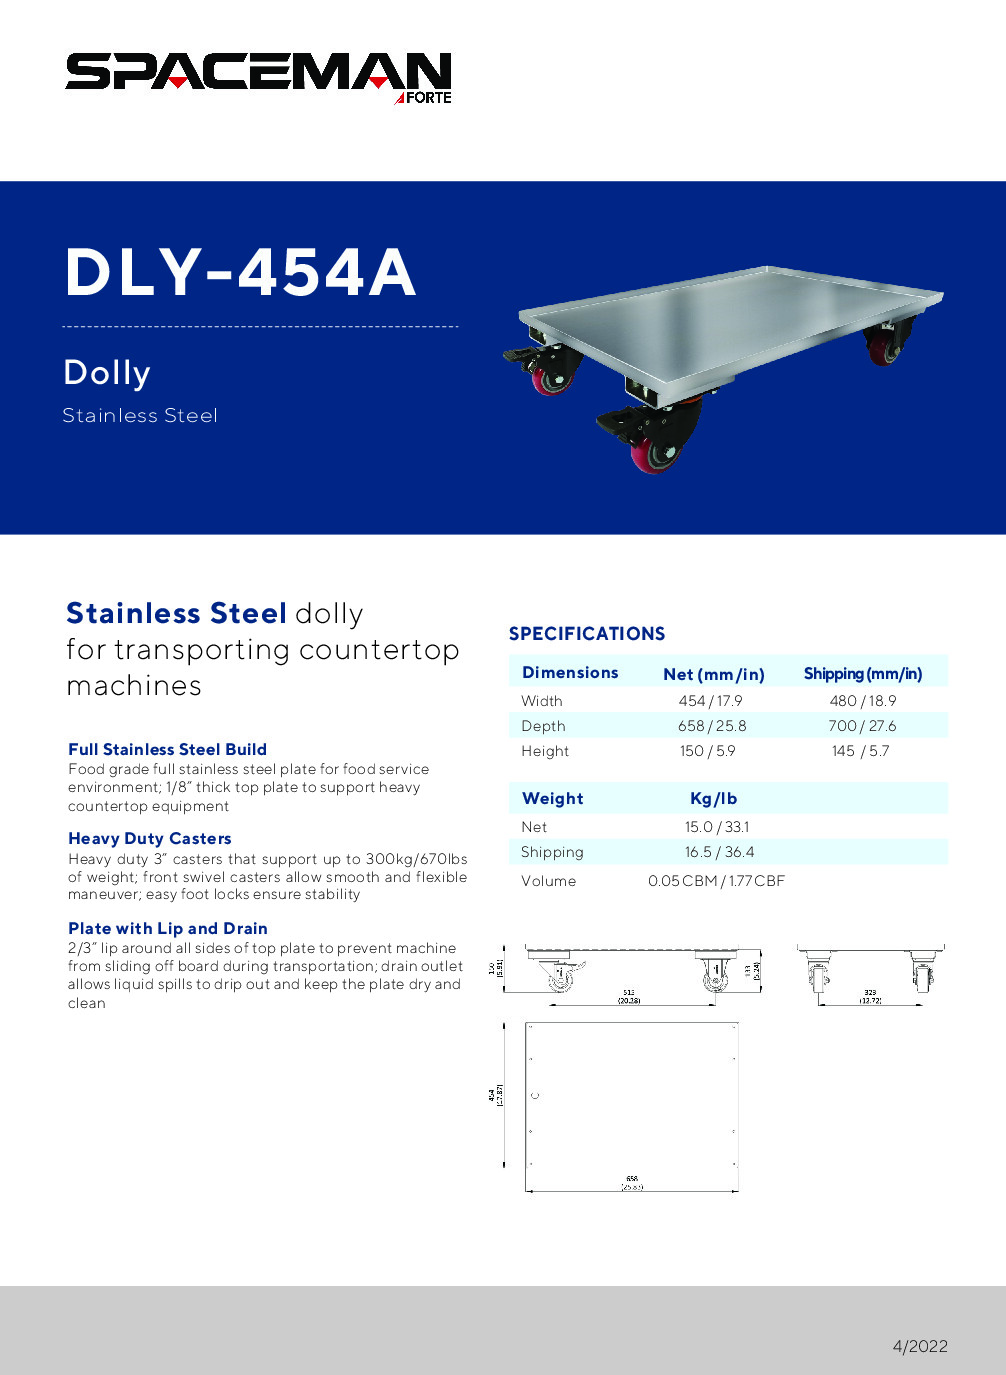 Spaceman DLY-454A Shelving Truck Dolly